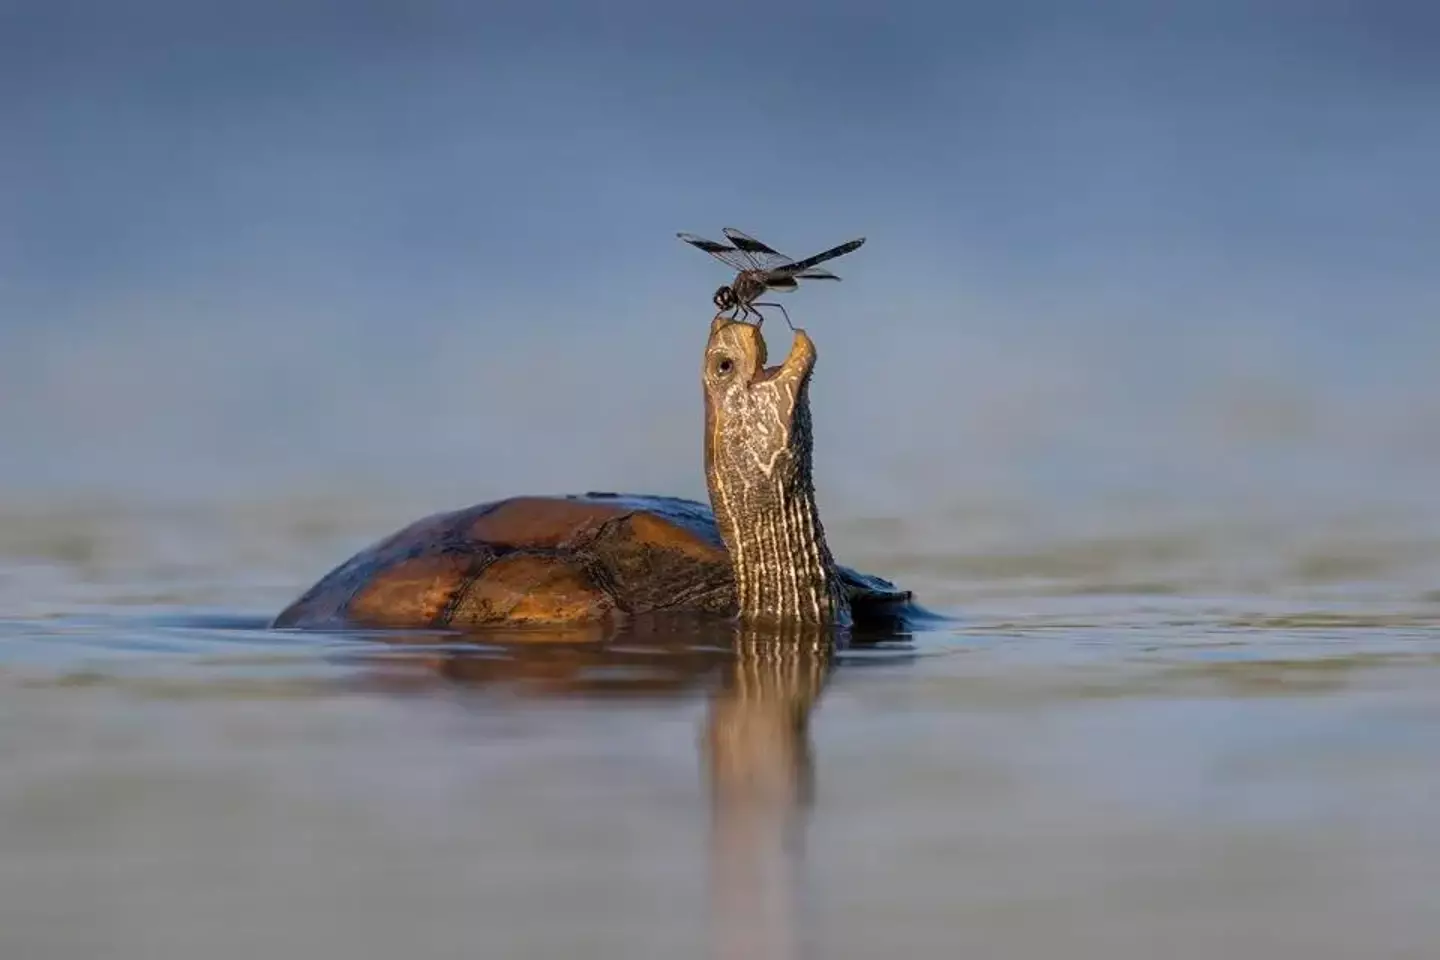 A turtle befriends a dragonfly.